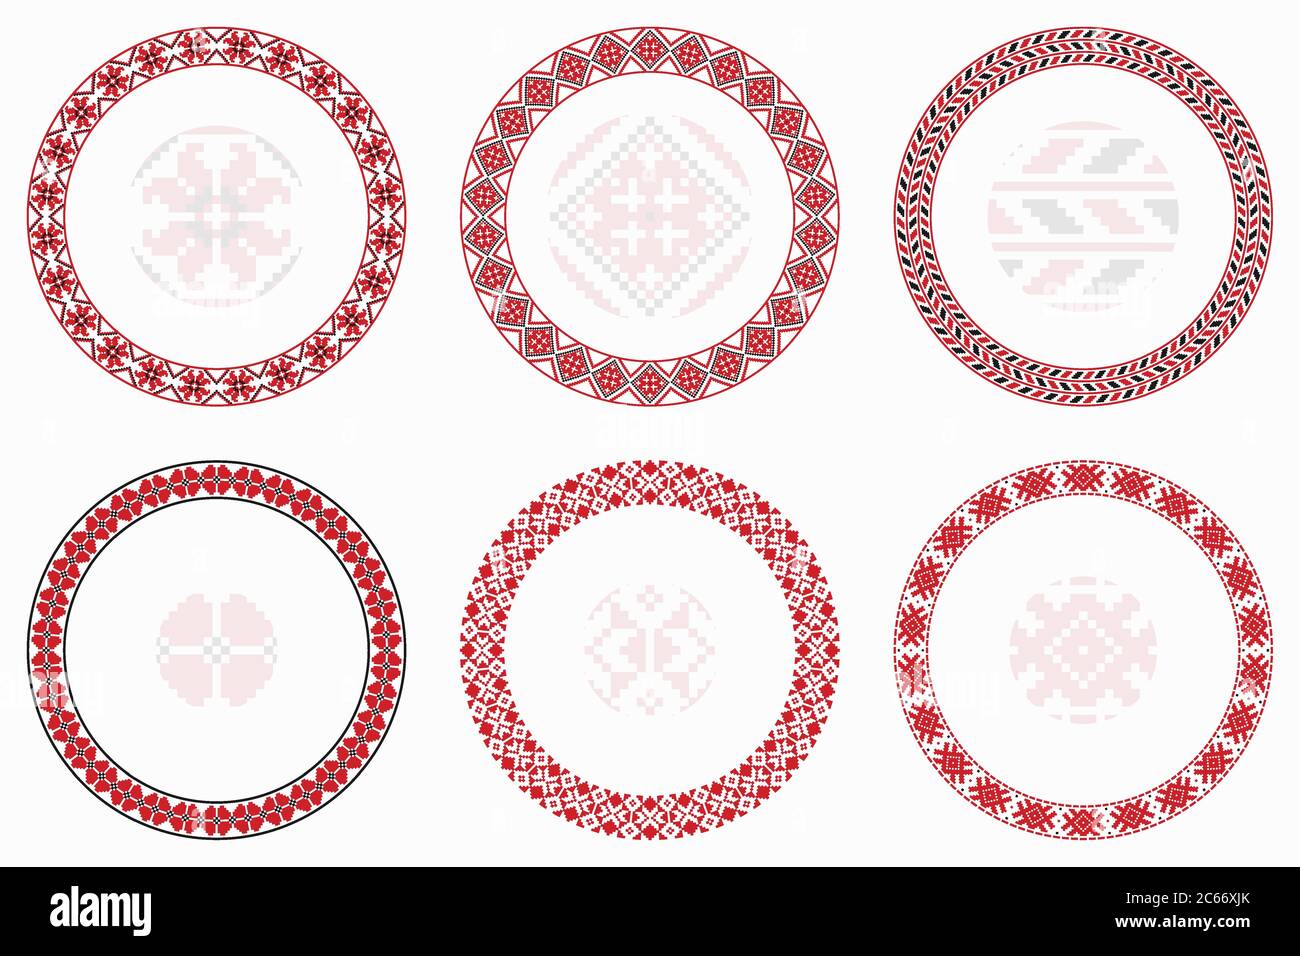 Slavic geometric round patterns set. Borders, frames. Vector illustration of round Slavic embroidery ornament elements with seamless pattern brushes Stock Vector